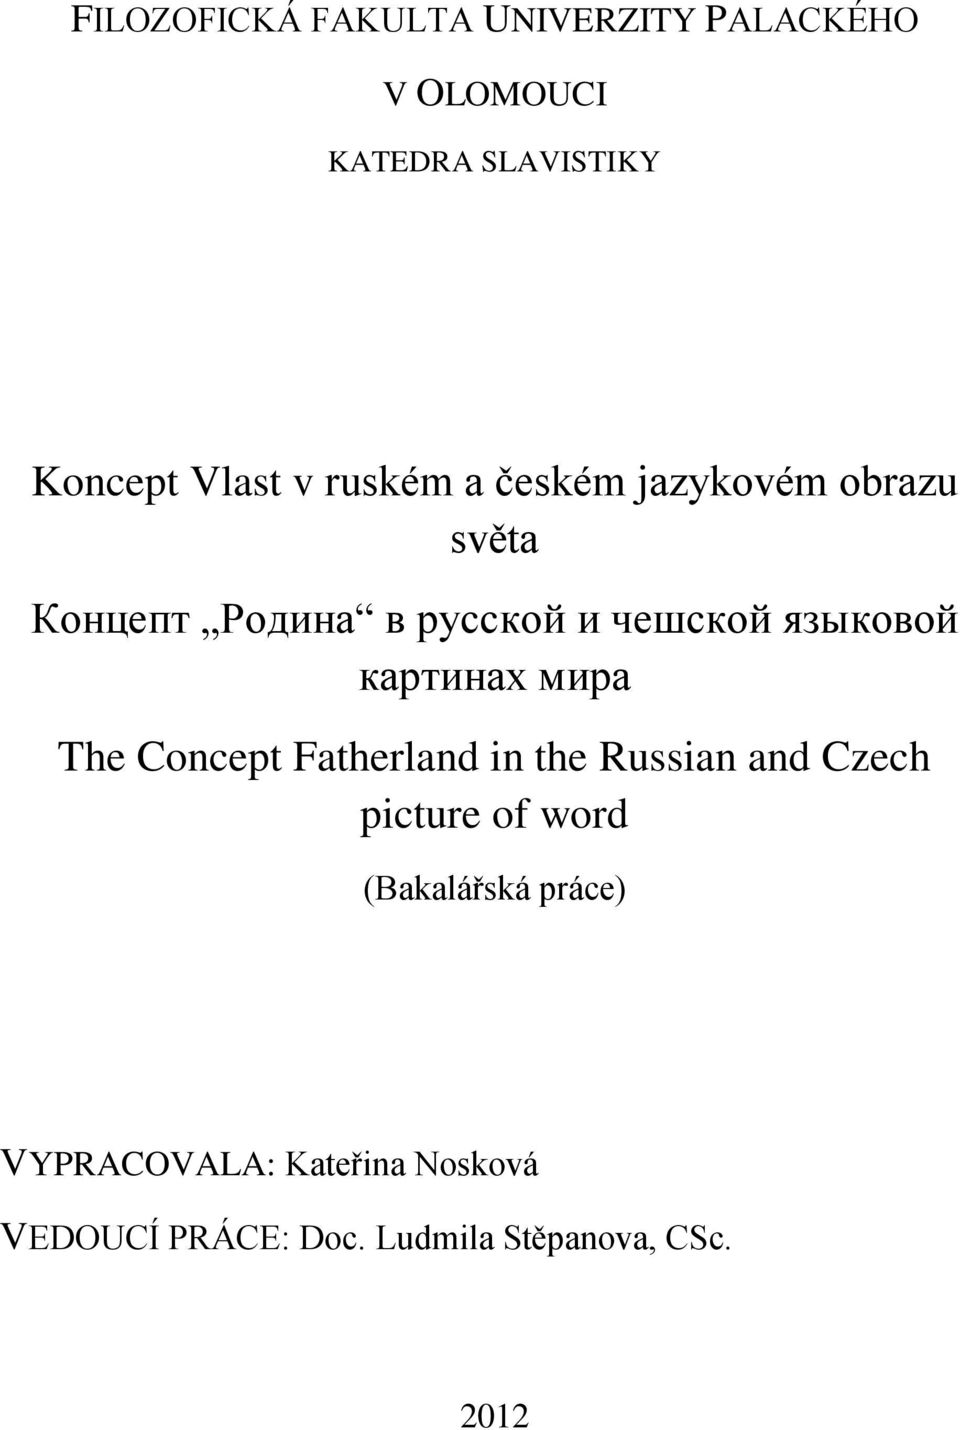 картинах мира The Concept Fatherland in the Russian and Czech picture of word